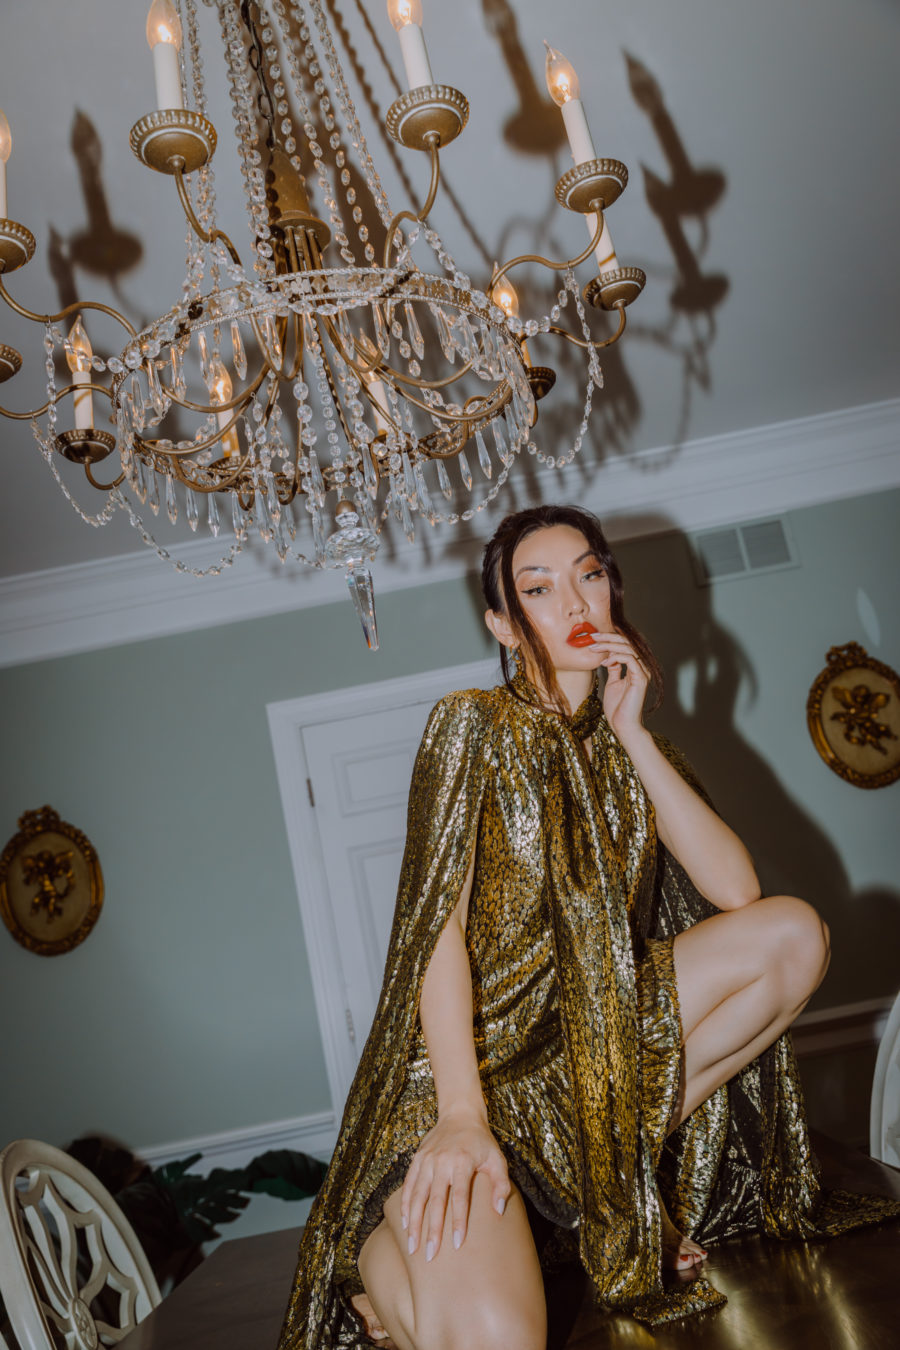 fashion blogger jessica wang wearing a gold dress with red lipstick and sharing 2021 beauty trends // Jessica Wang - Notjessfashion.com